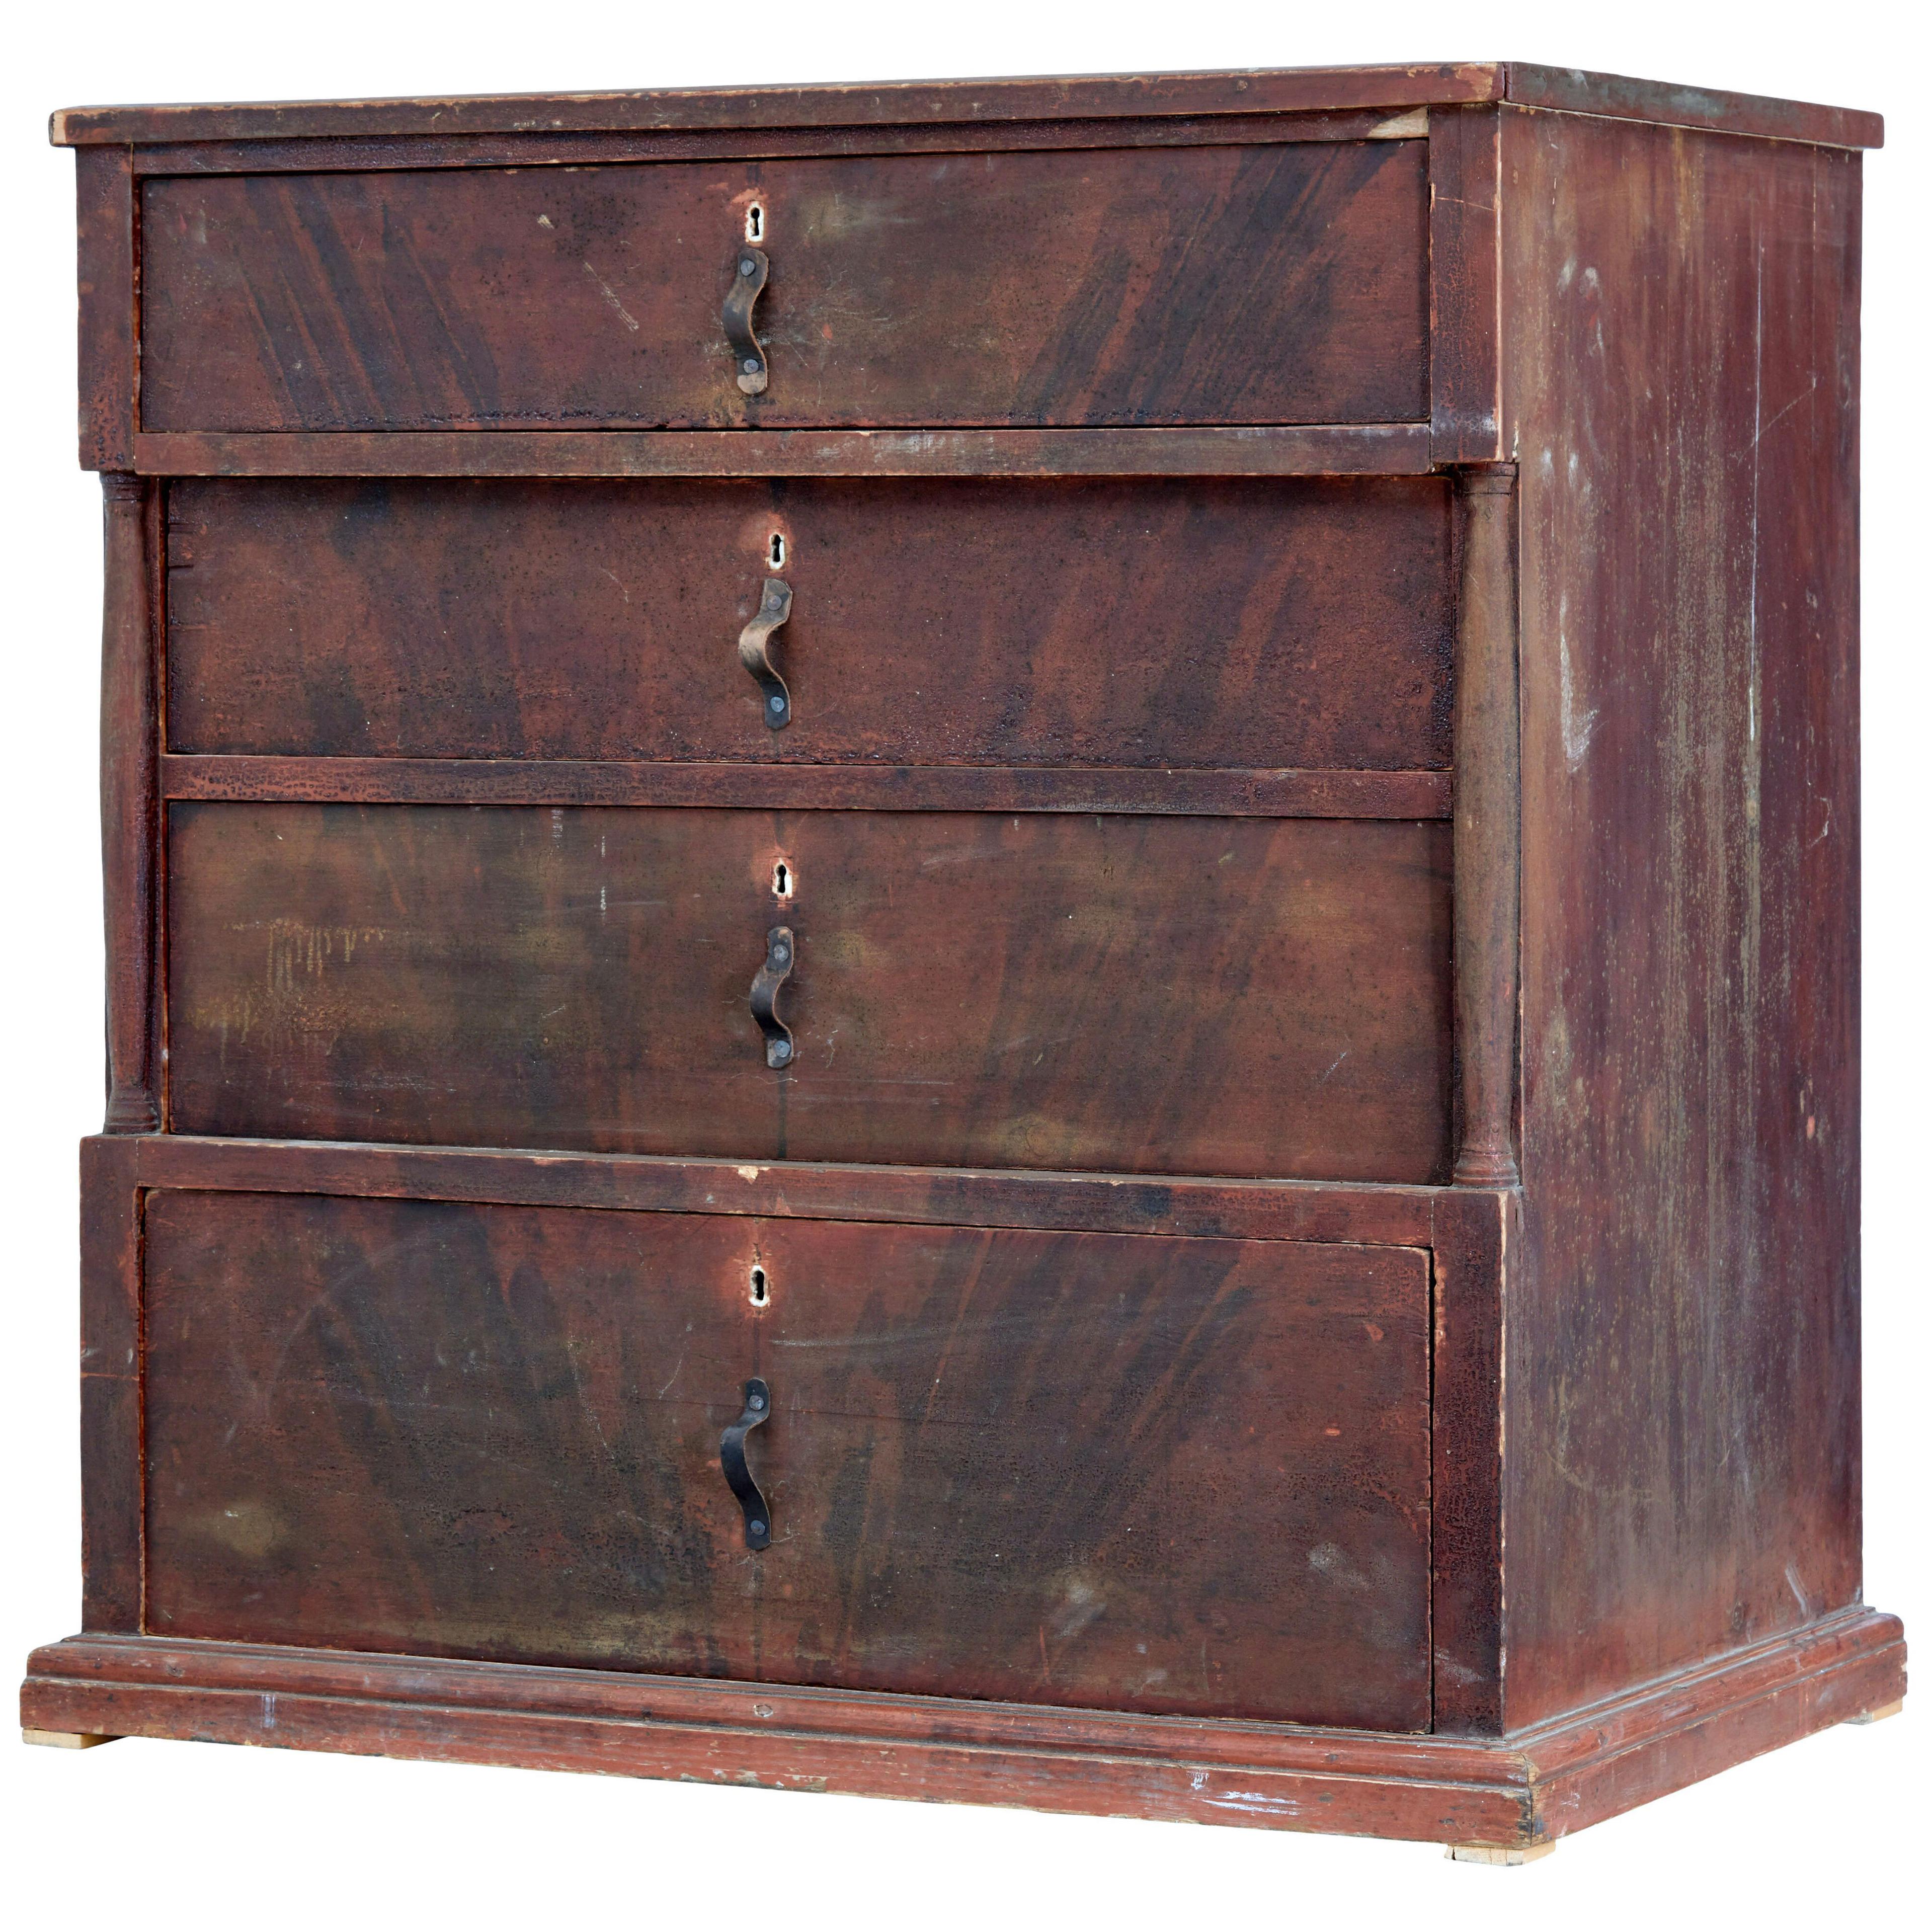 19TH CENTURY HAND PAINTED CHEST OF DRAWERS